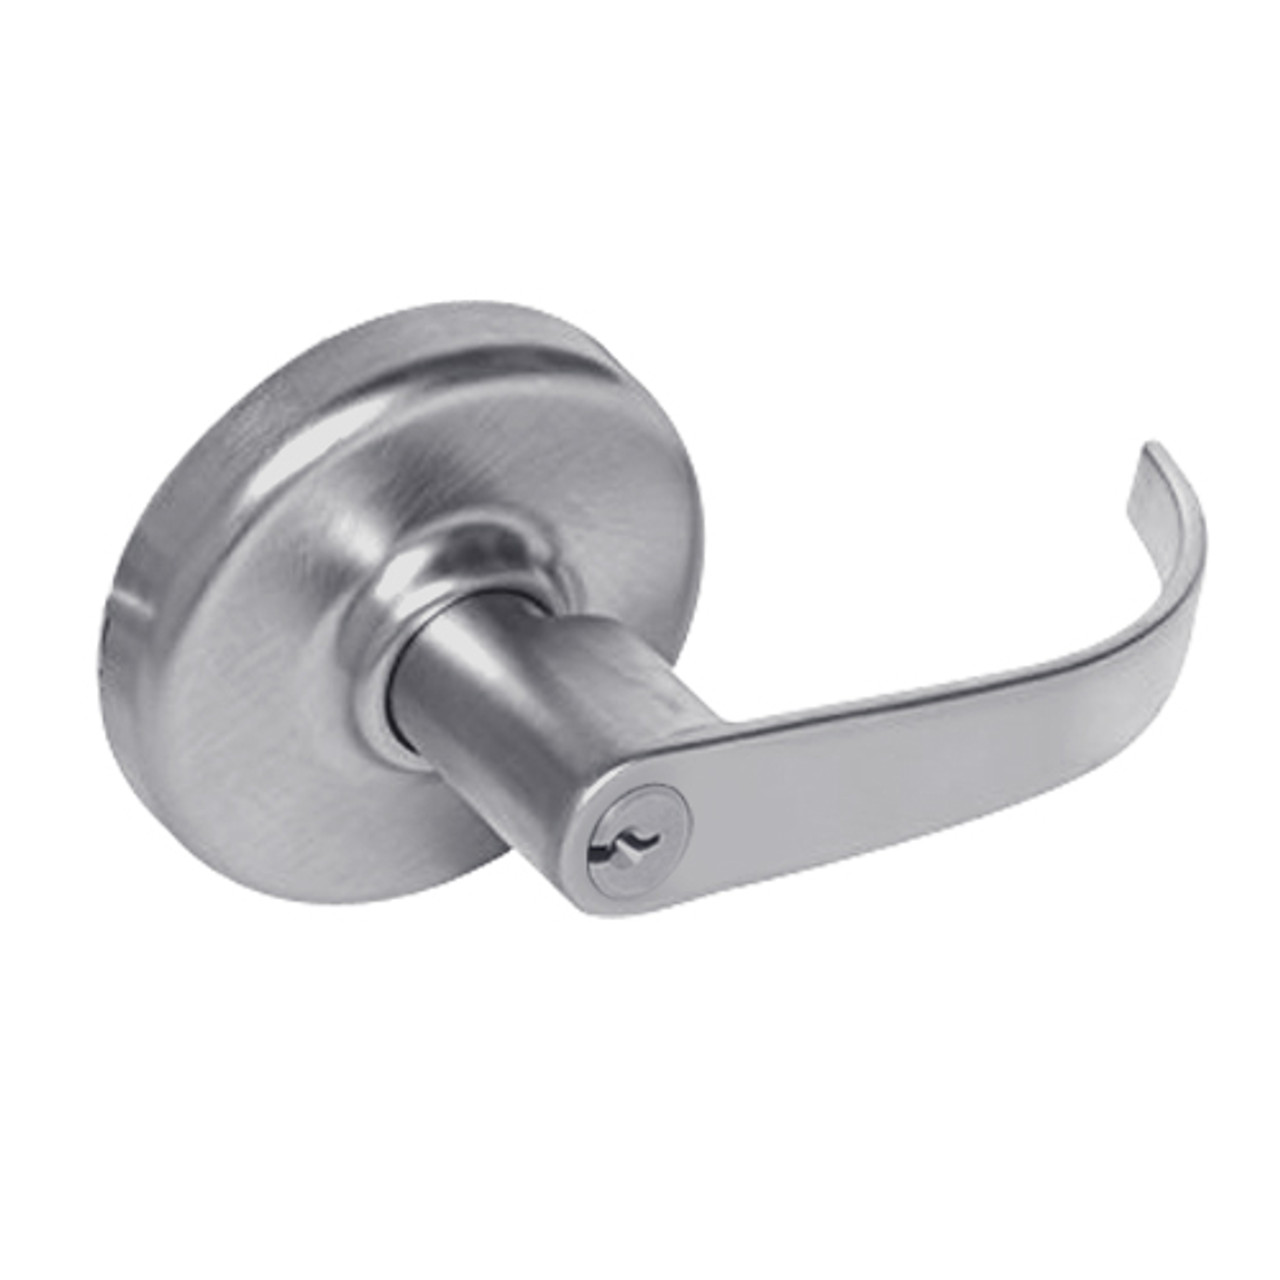 CL3375-PZD-626 Corbin CL3300 Series Extra Heavy Duty Corridor/Dormitory Cylindrical Locksets with Princeton Lever in Satin Chrome Finish